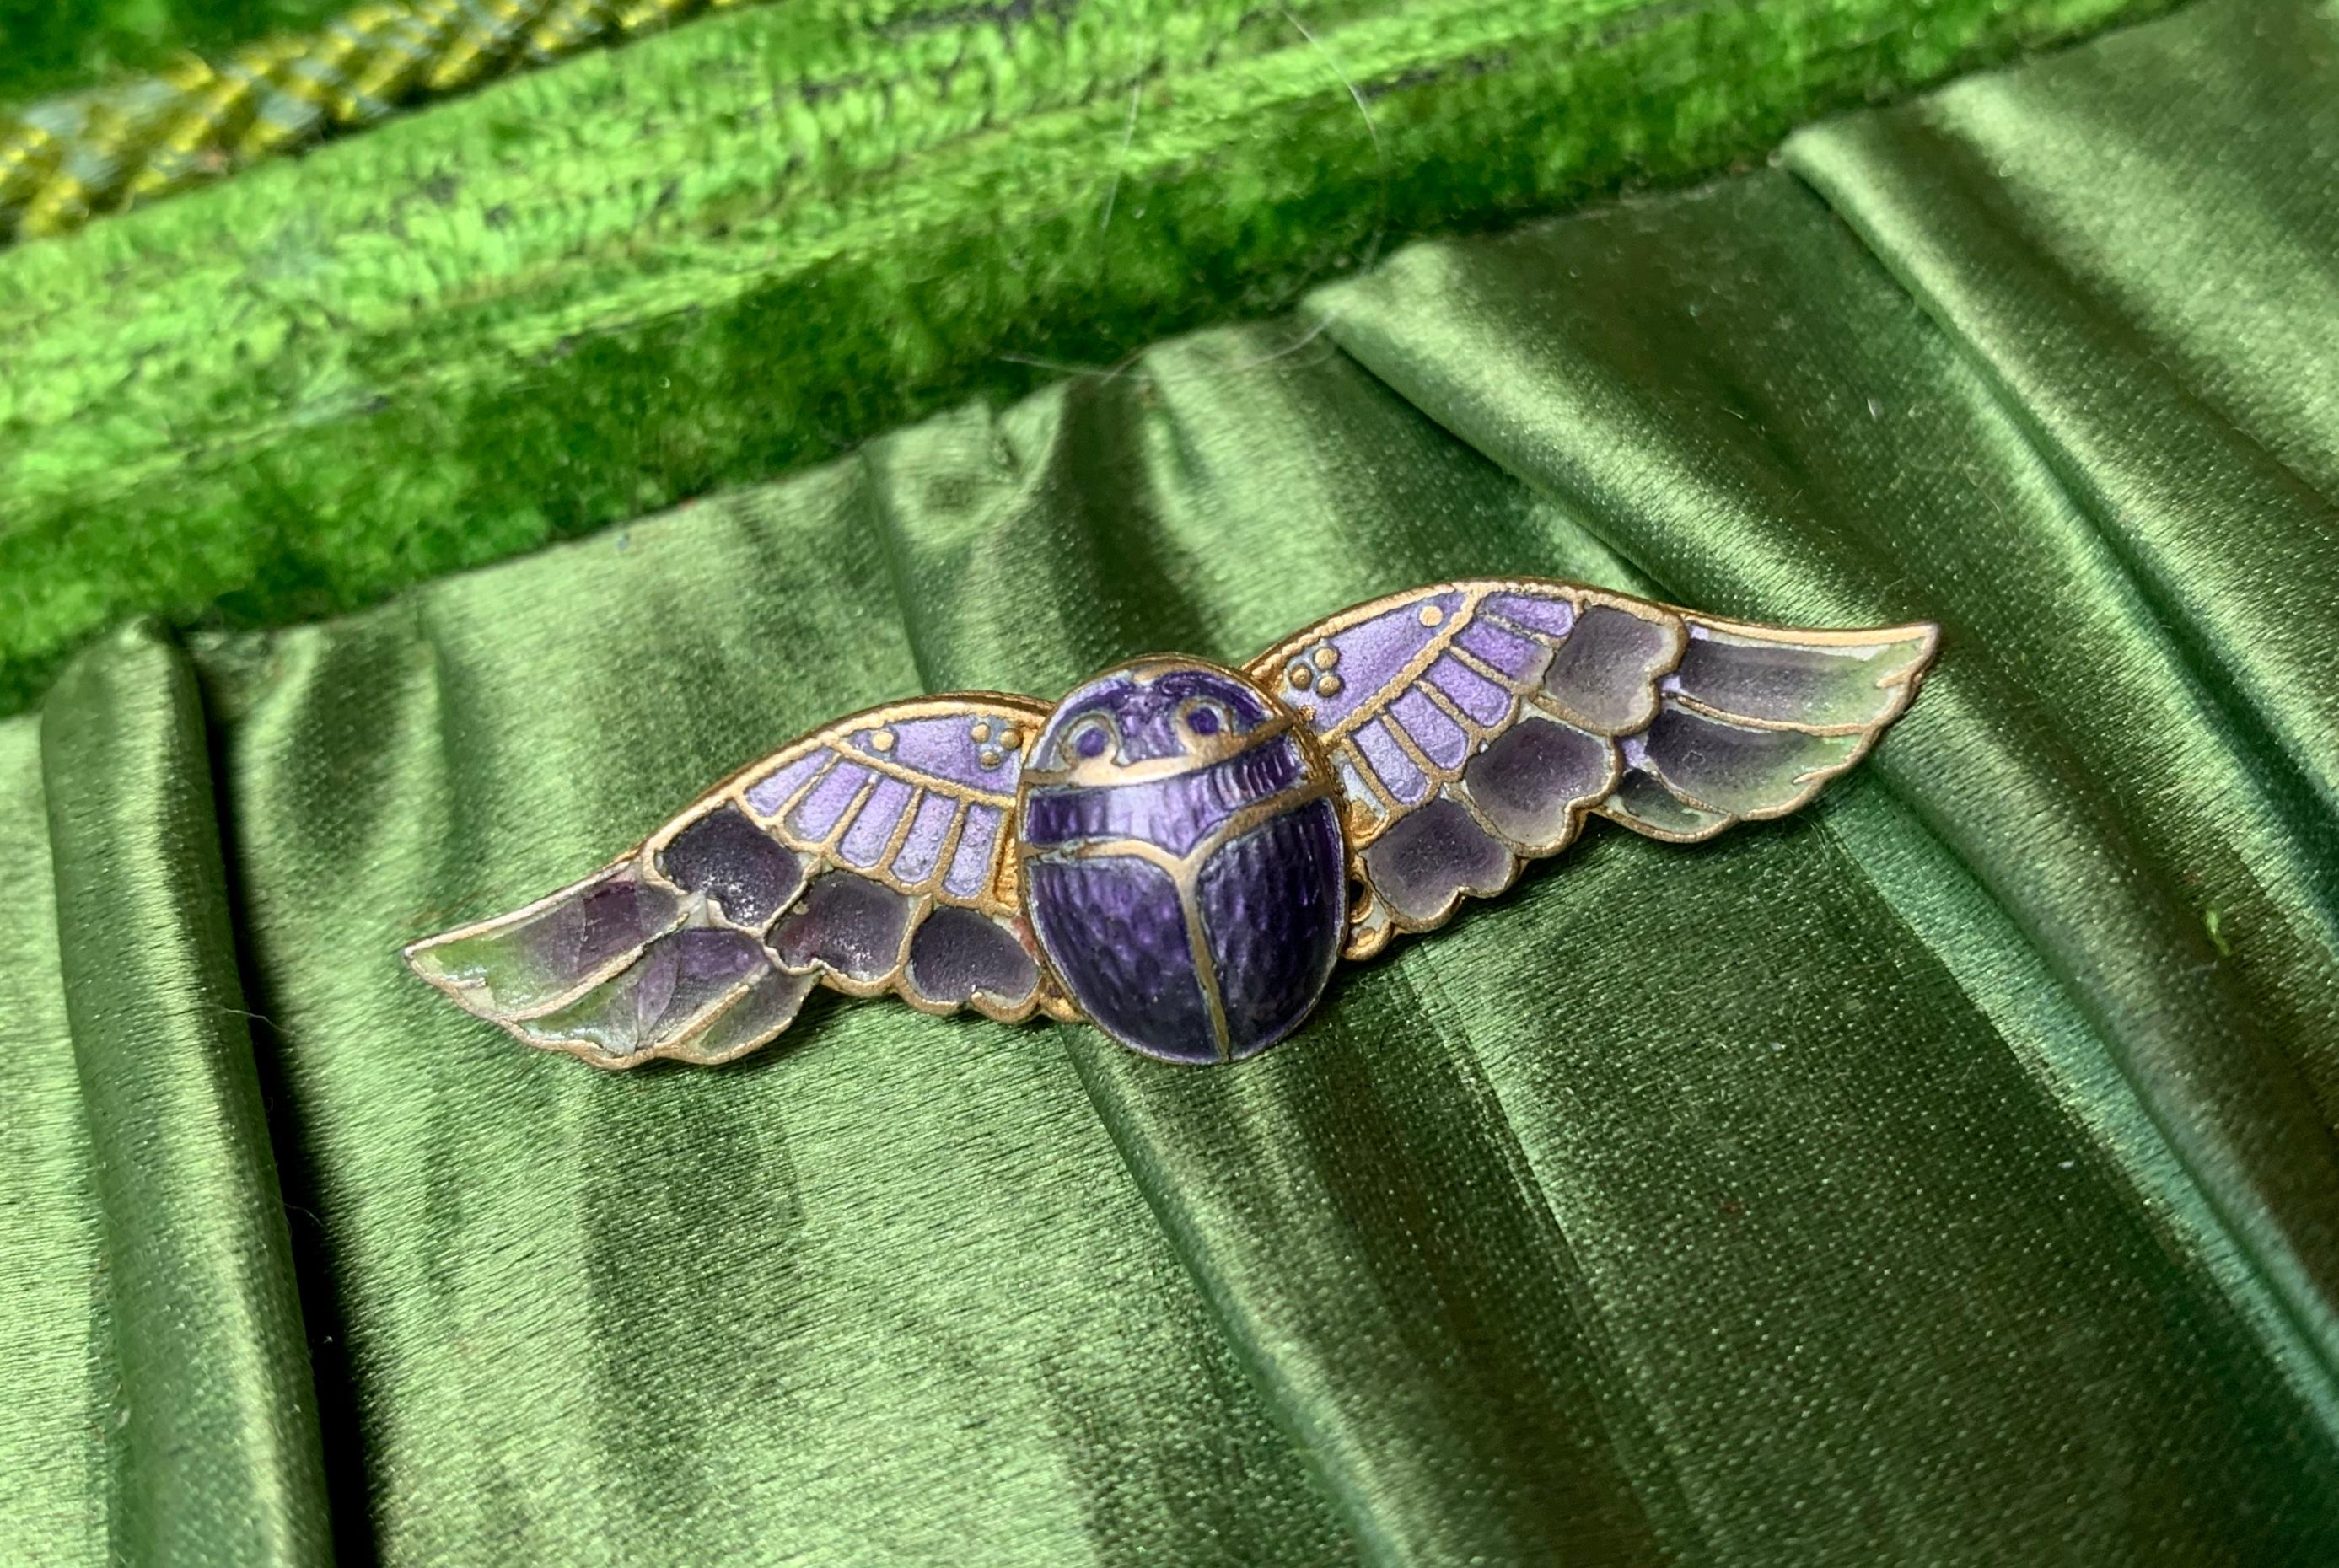 A rare Art Deco Egyptian Revival masterpiece of a Winged Scarab Insect Brooch done in Plique a Jour Enamel over Silver.  The Museum Quality brooch depicts a winged Scarab beetle, one of the signature motifs of the Egyptian Revival movement. 
The